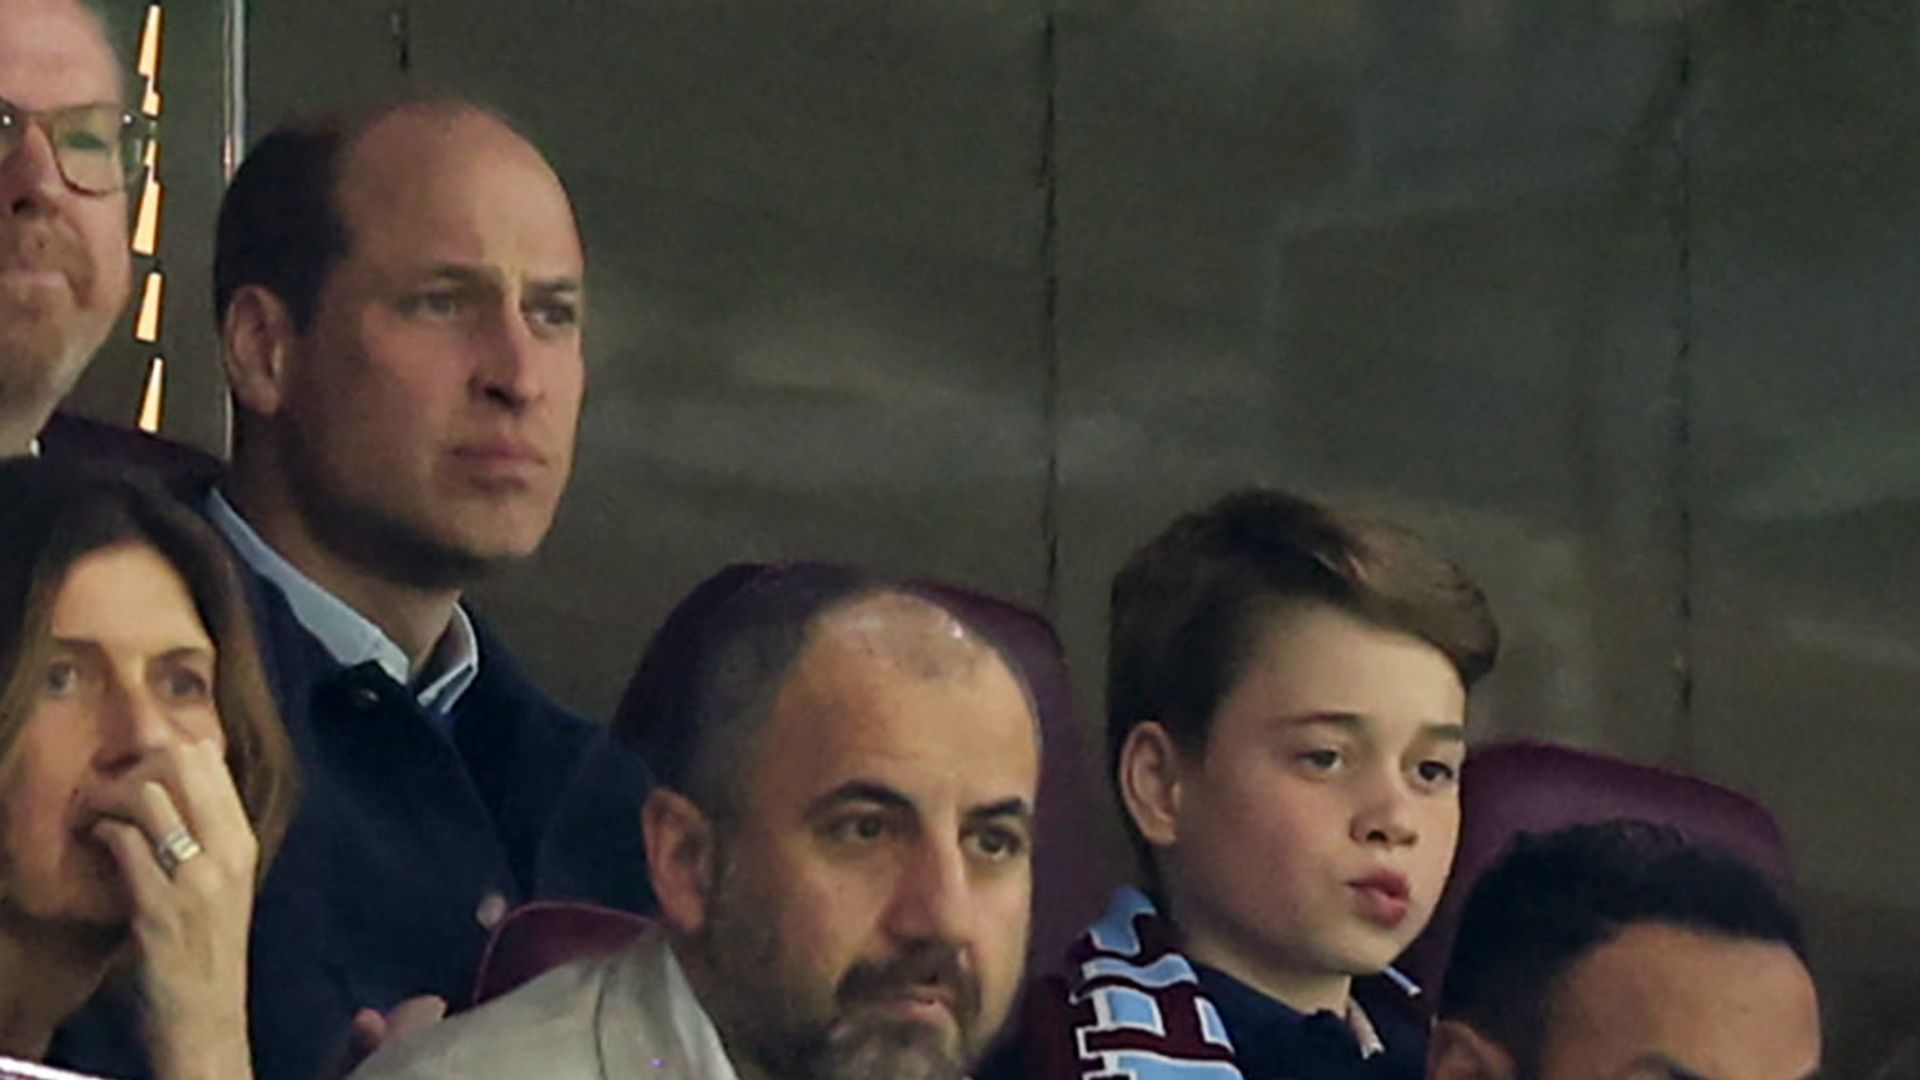 Prince William treats Prince George to a night at the football as Easter holidays come to an end